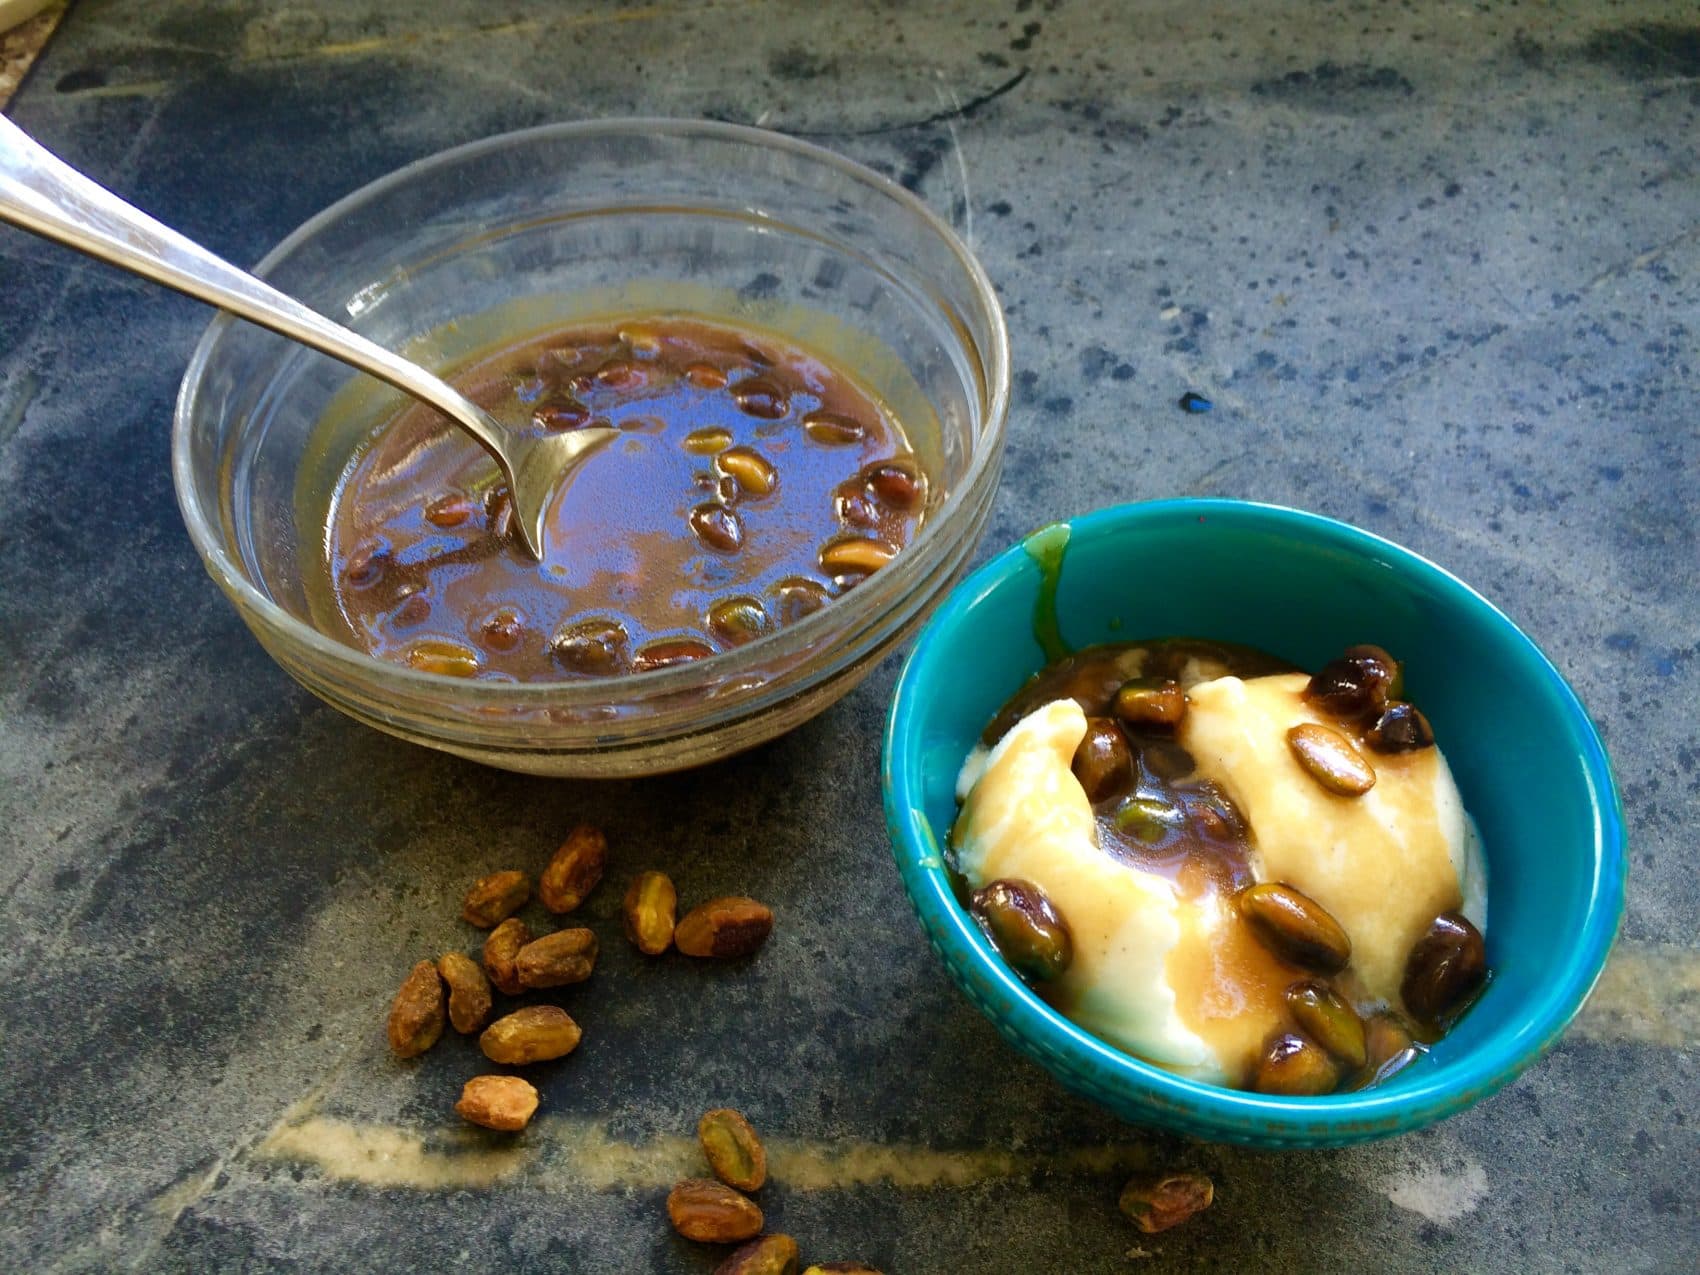 Kathy's sea salt-caramel-pistachio ice cream sauce drizzled over a bowl of ice cream. (Kathy Gunst for Here &amp; Now)